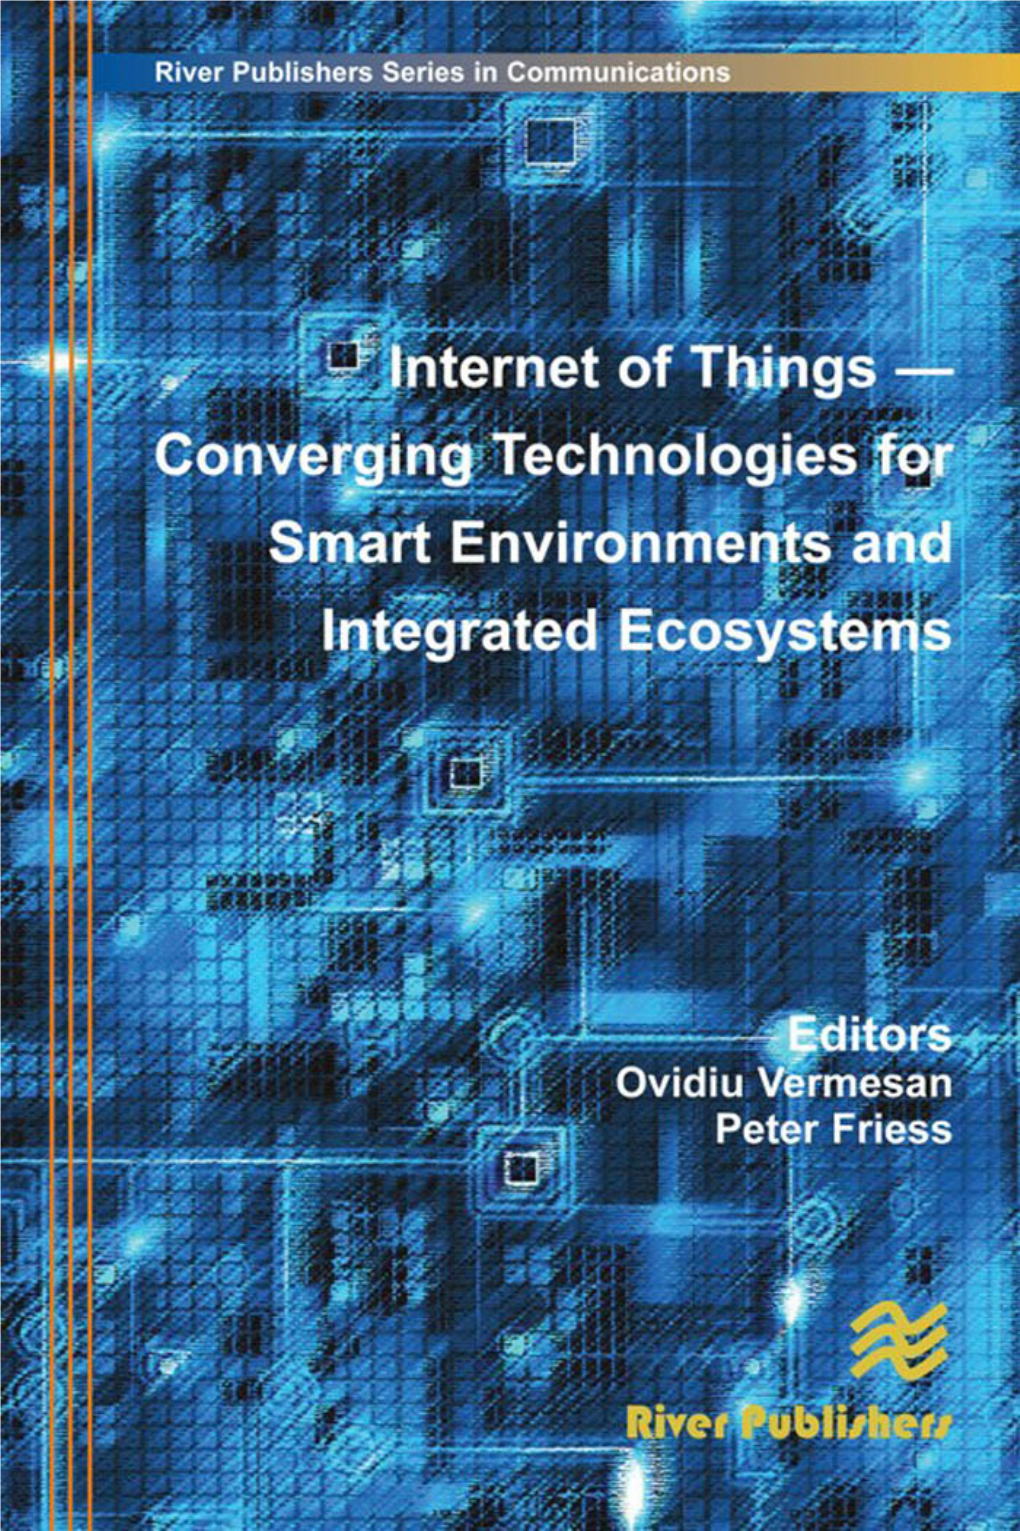 Converging Technologies for Smart Environments and Integrated Ecosystems RIVER PUBLISHERS SERIES in COMMUNICATIONS